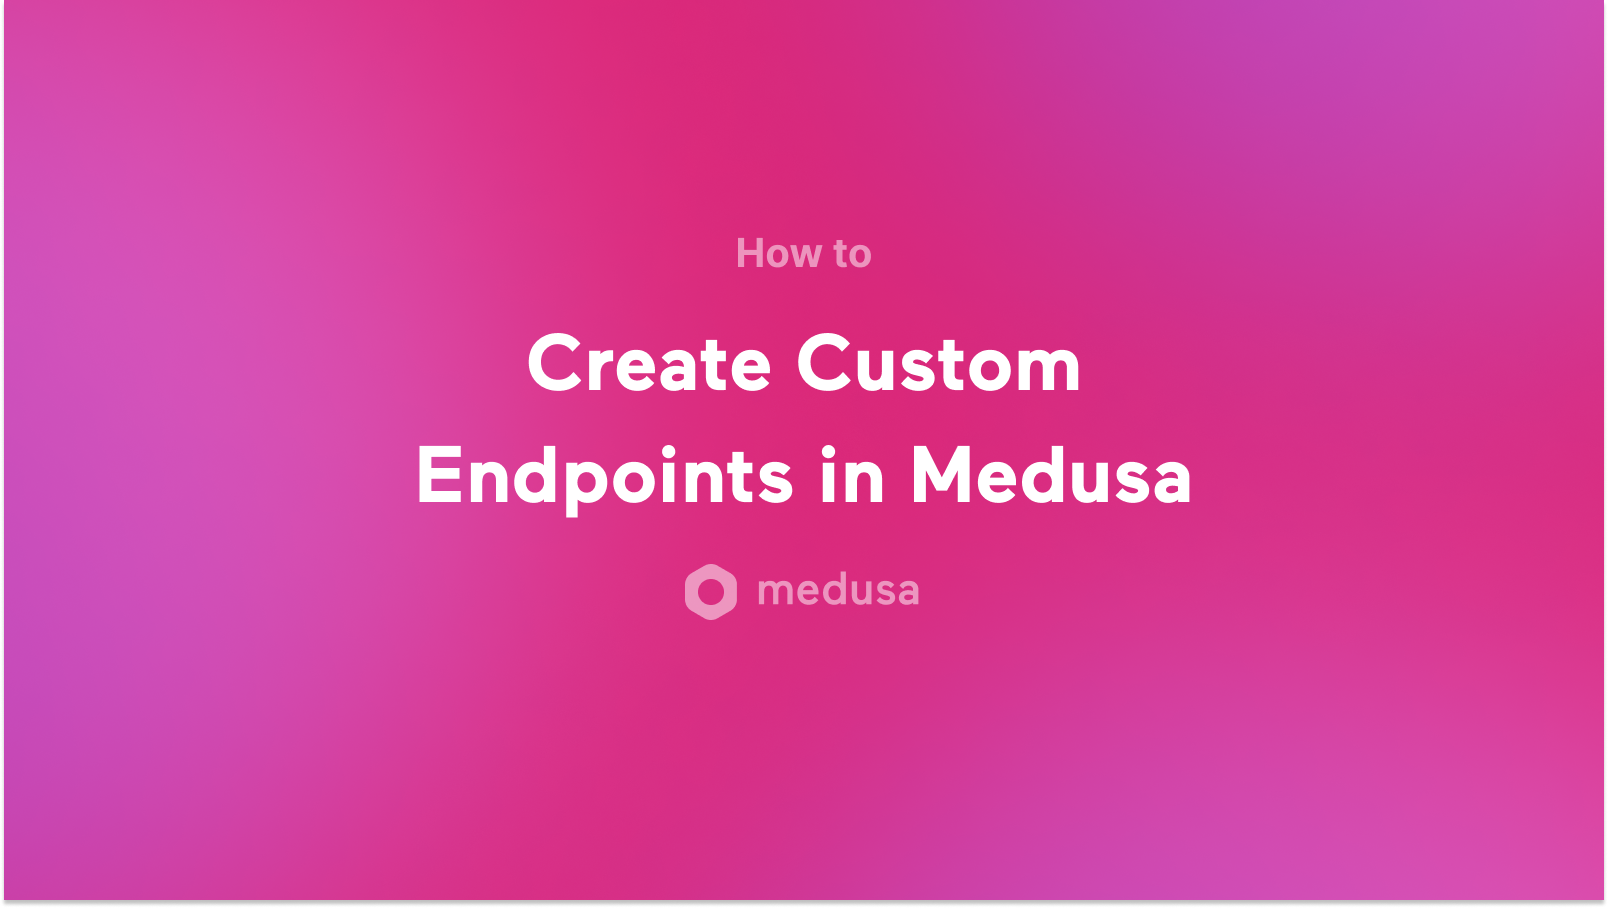 How to Create Custom Endpoints in Medusa